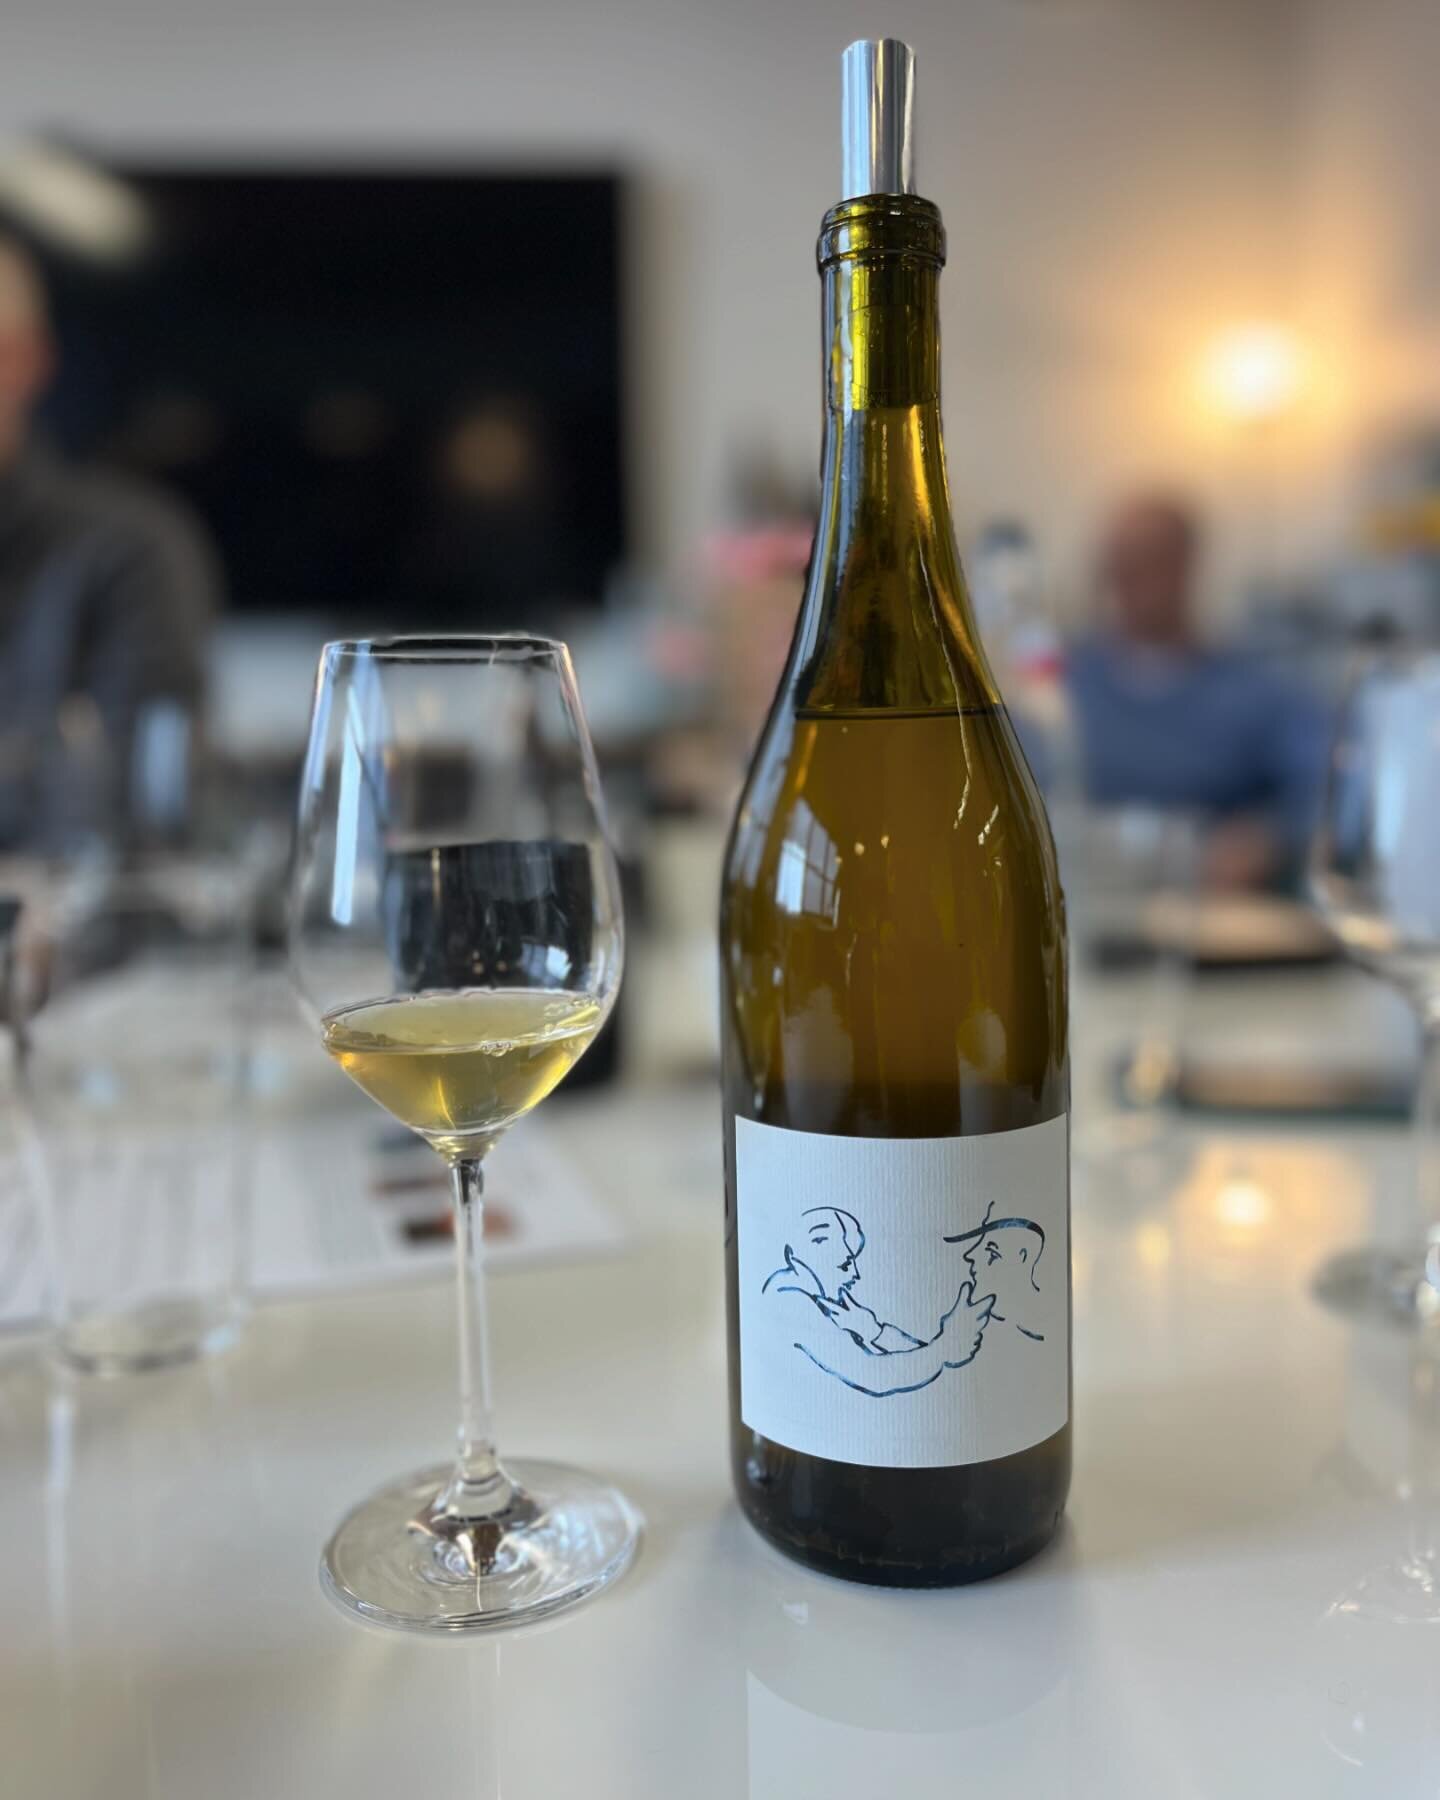 NEW TO HIGH ROAD! 📣 Founded in 2021 by C&eacute;sar Vega and Louisiane Remy, @barbichettewines is a New York-based project focused on producing high-quality natural wines that celebrate terroir that are crafted without the use of added sulfites, yea